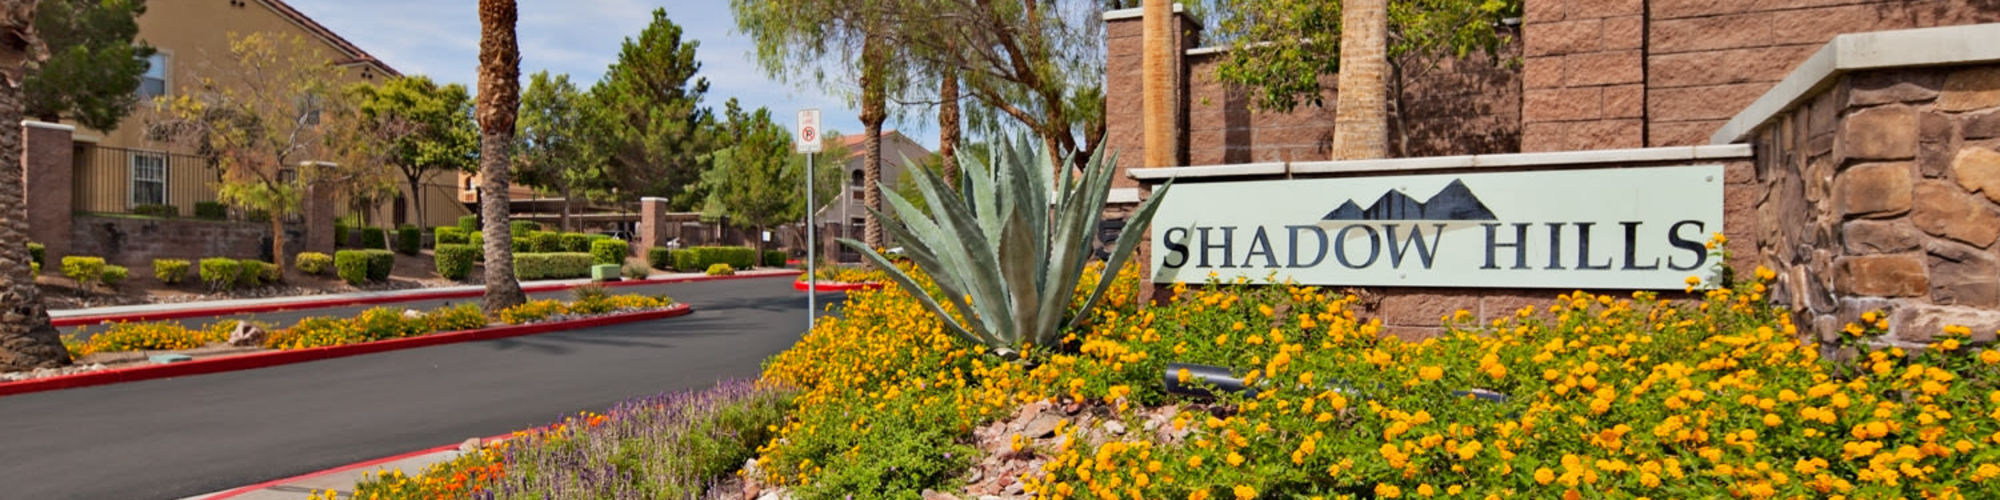 Apply to live at Shadow Hills at Lone Mountain in Las Vegas, Nevada